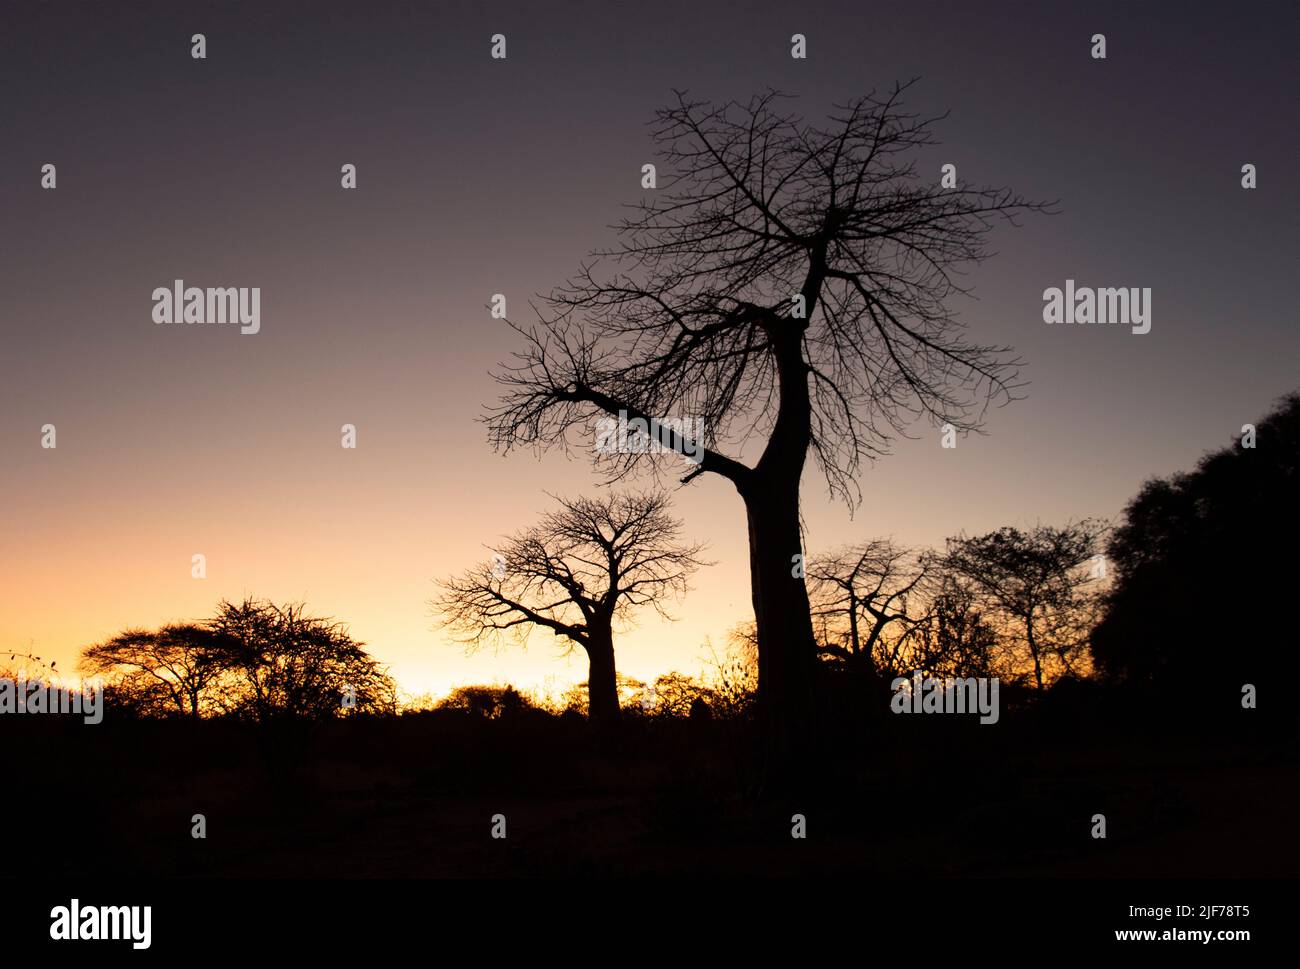 Ancient Baobabs stand silhouetted against the last glow of dusk in Ruaha National Park. The tree has a distinctive upside down shape Stock Photo